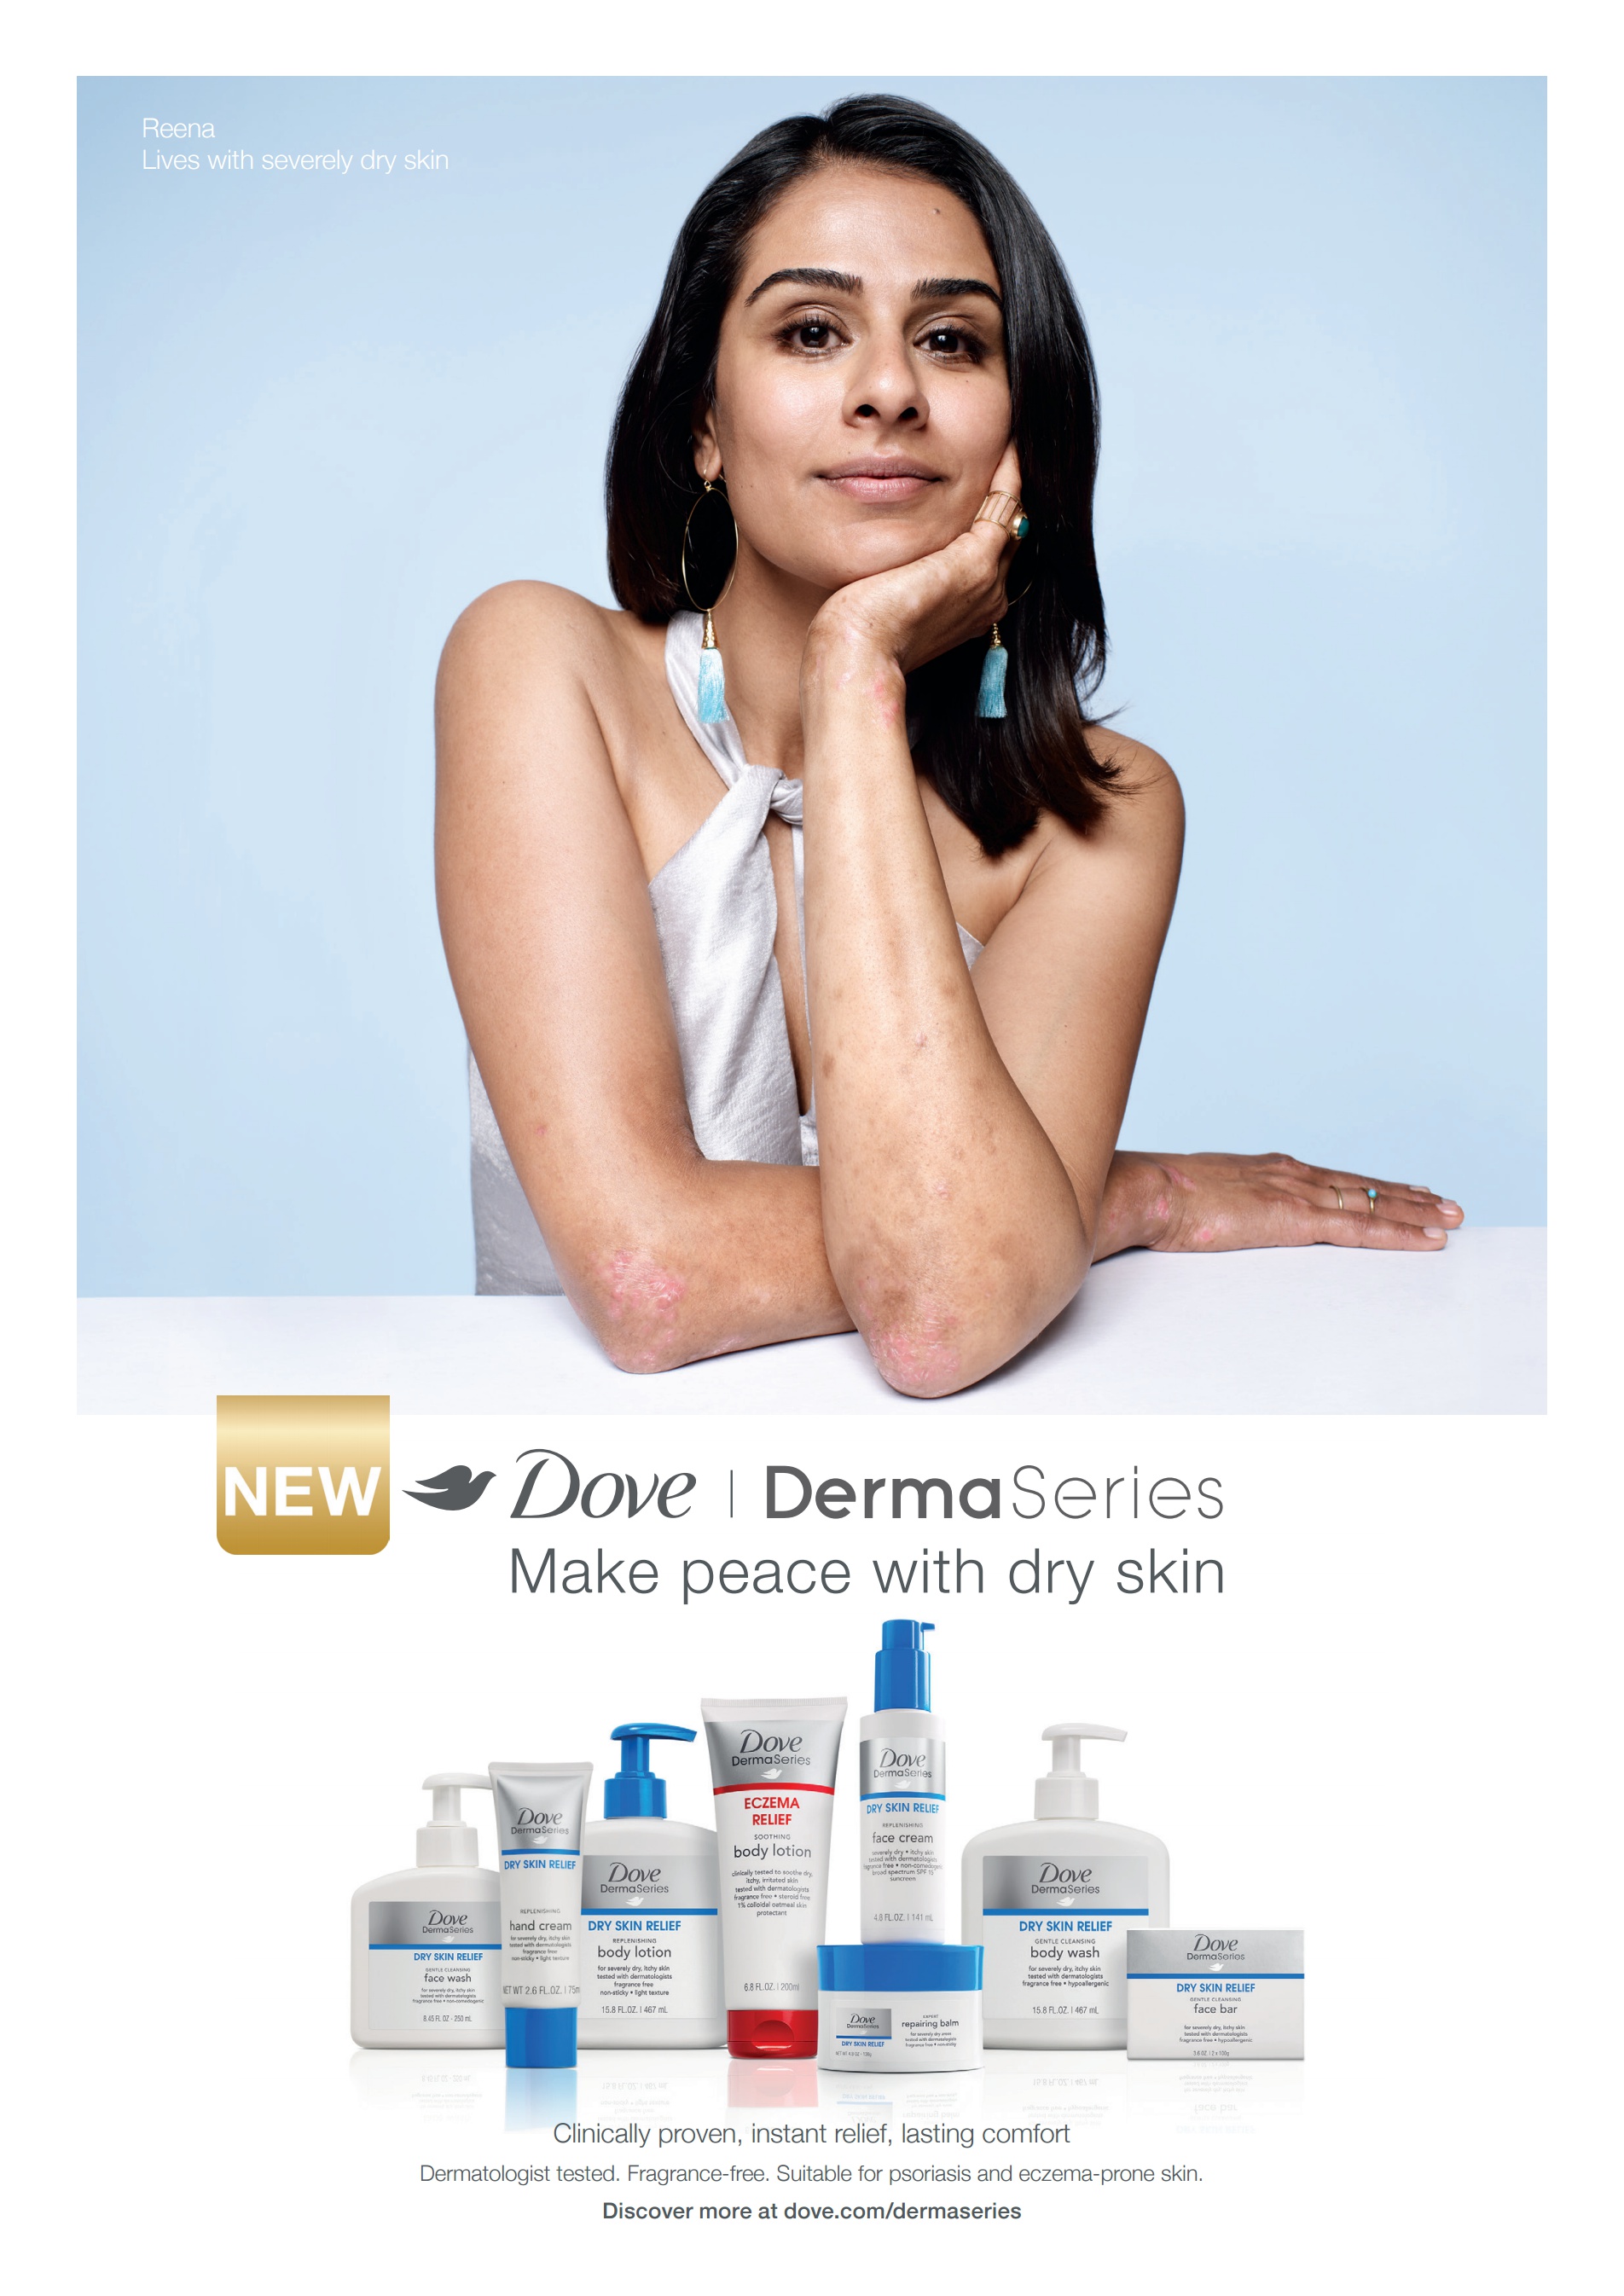 Reena from Dove DermaSeries campaign